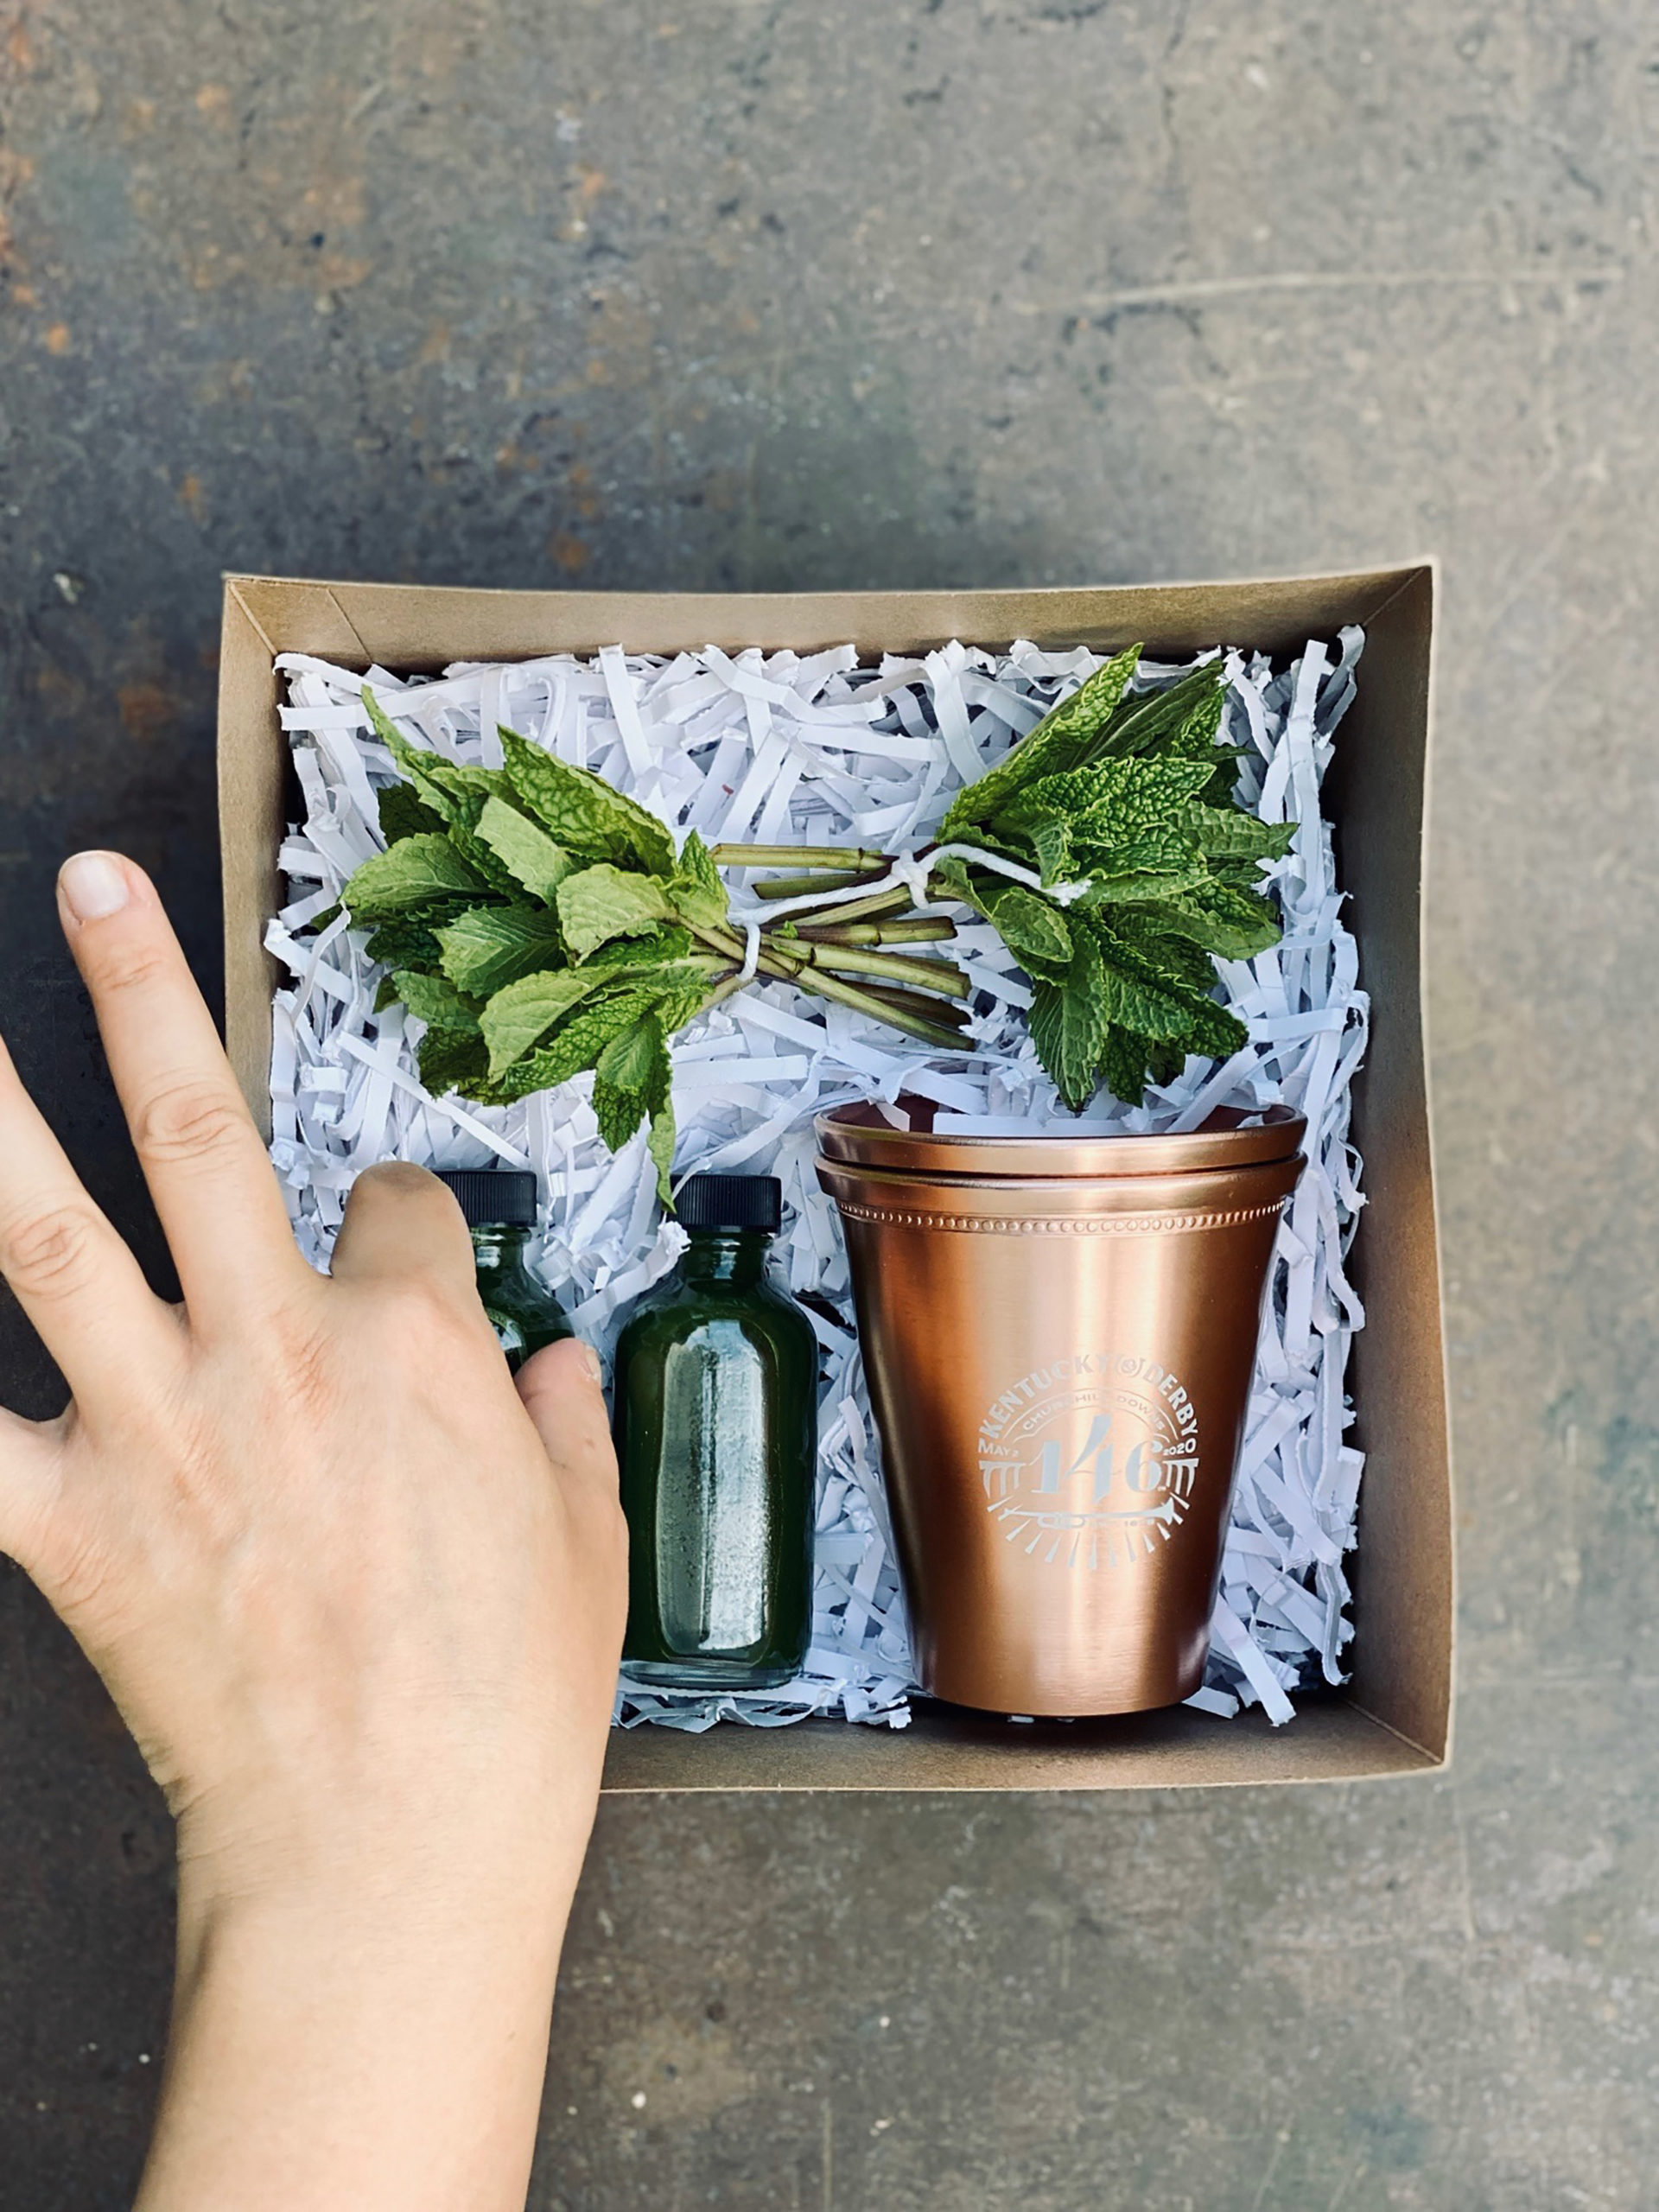 box with hand reaching in inside is mint and 2 green bottles and copper glasses